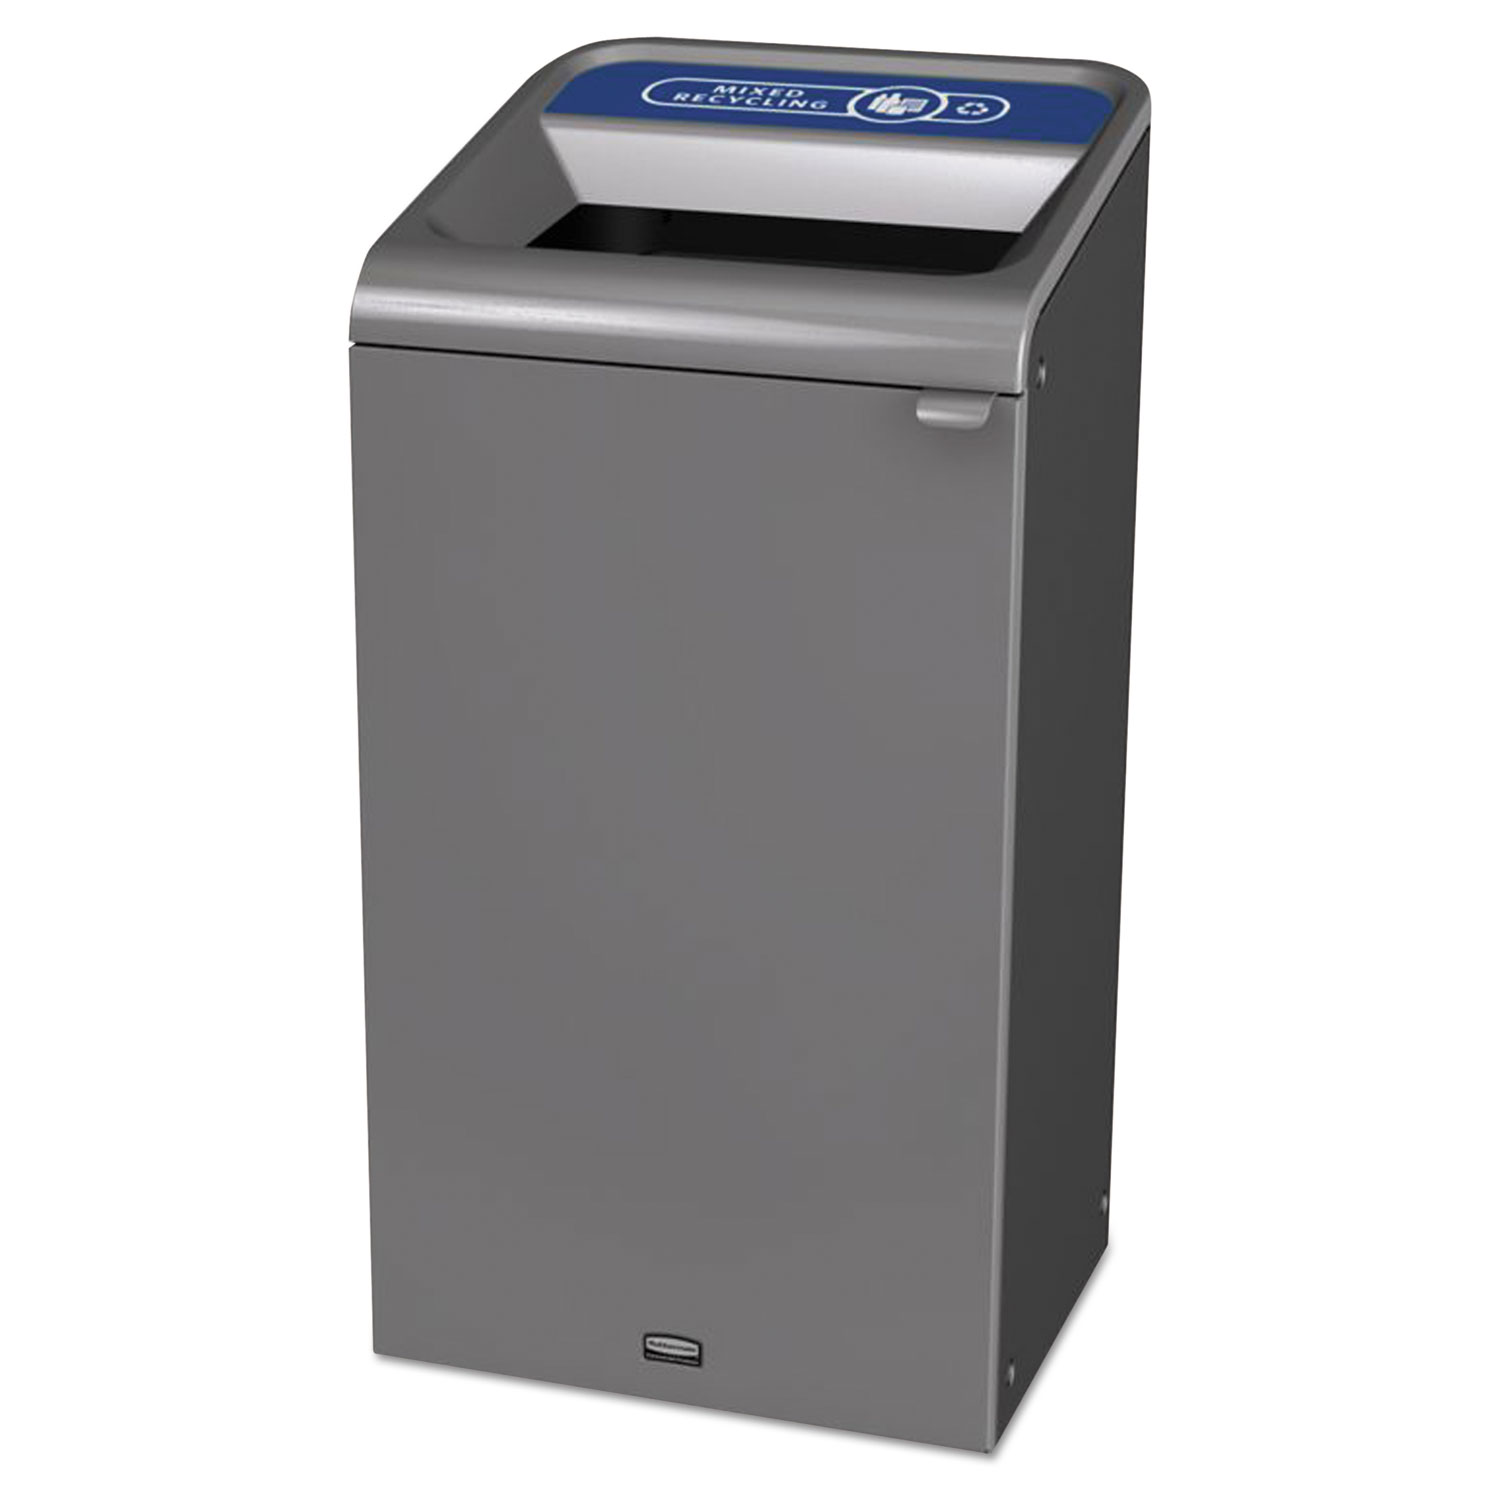  Rubbermaid Commercial 1961622 Configure Indoor Recycling Waste Receptacle, 23 gal, Gray, Mixed Recycling (RCP1961622) 